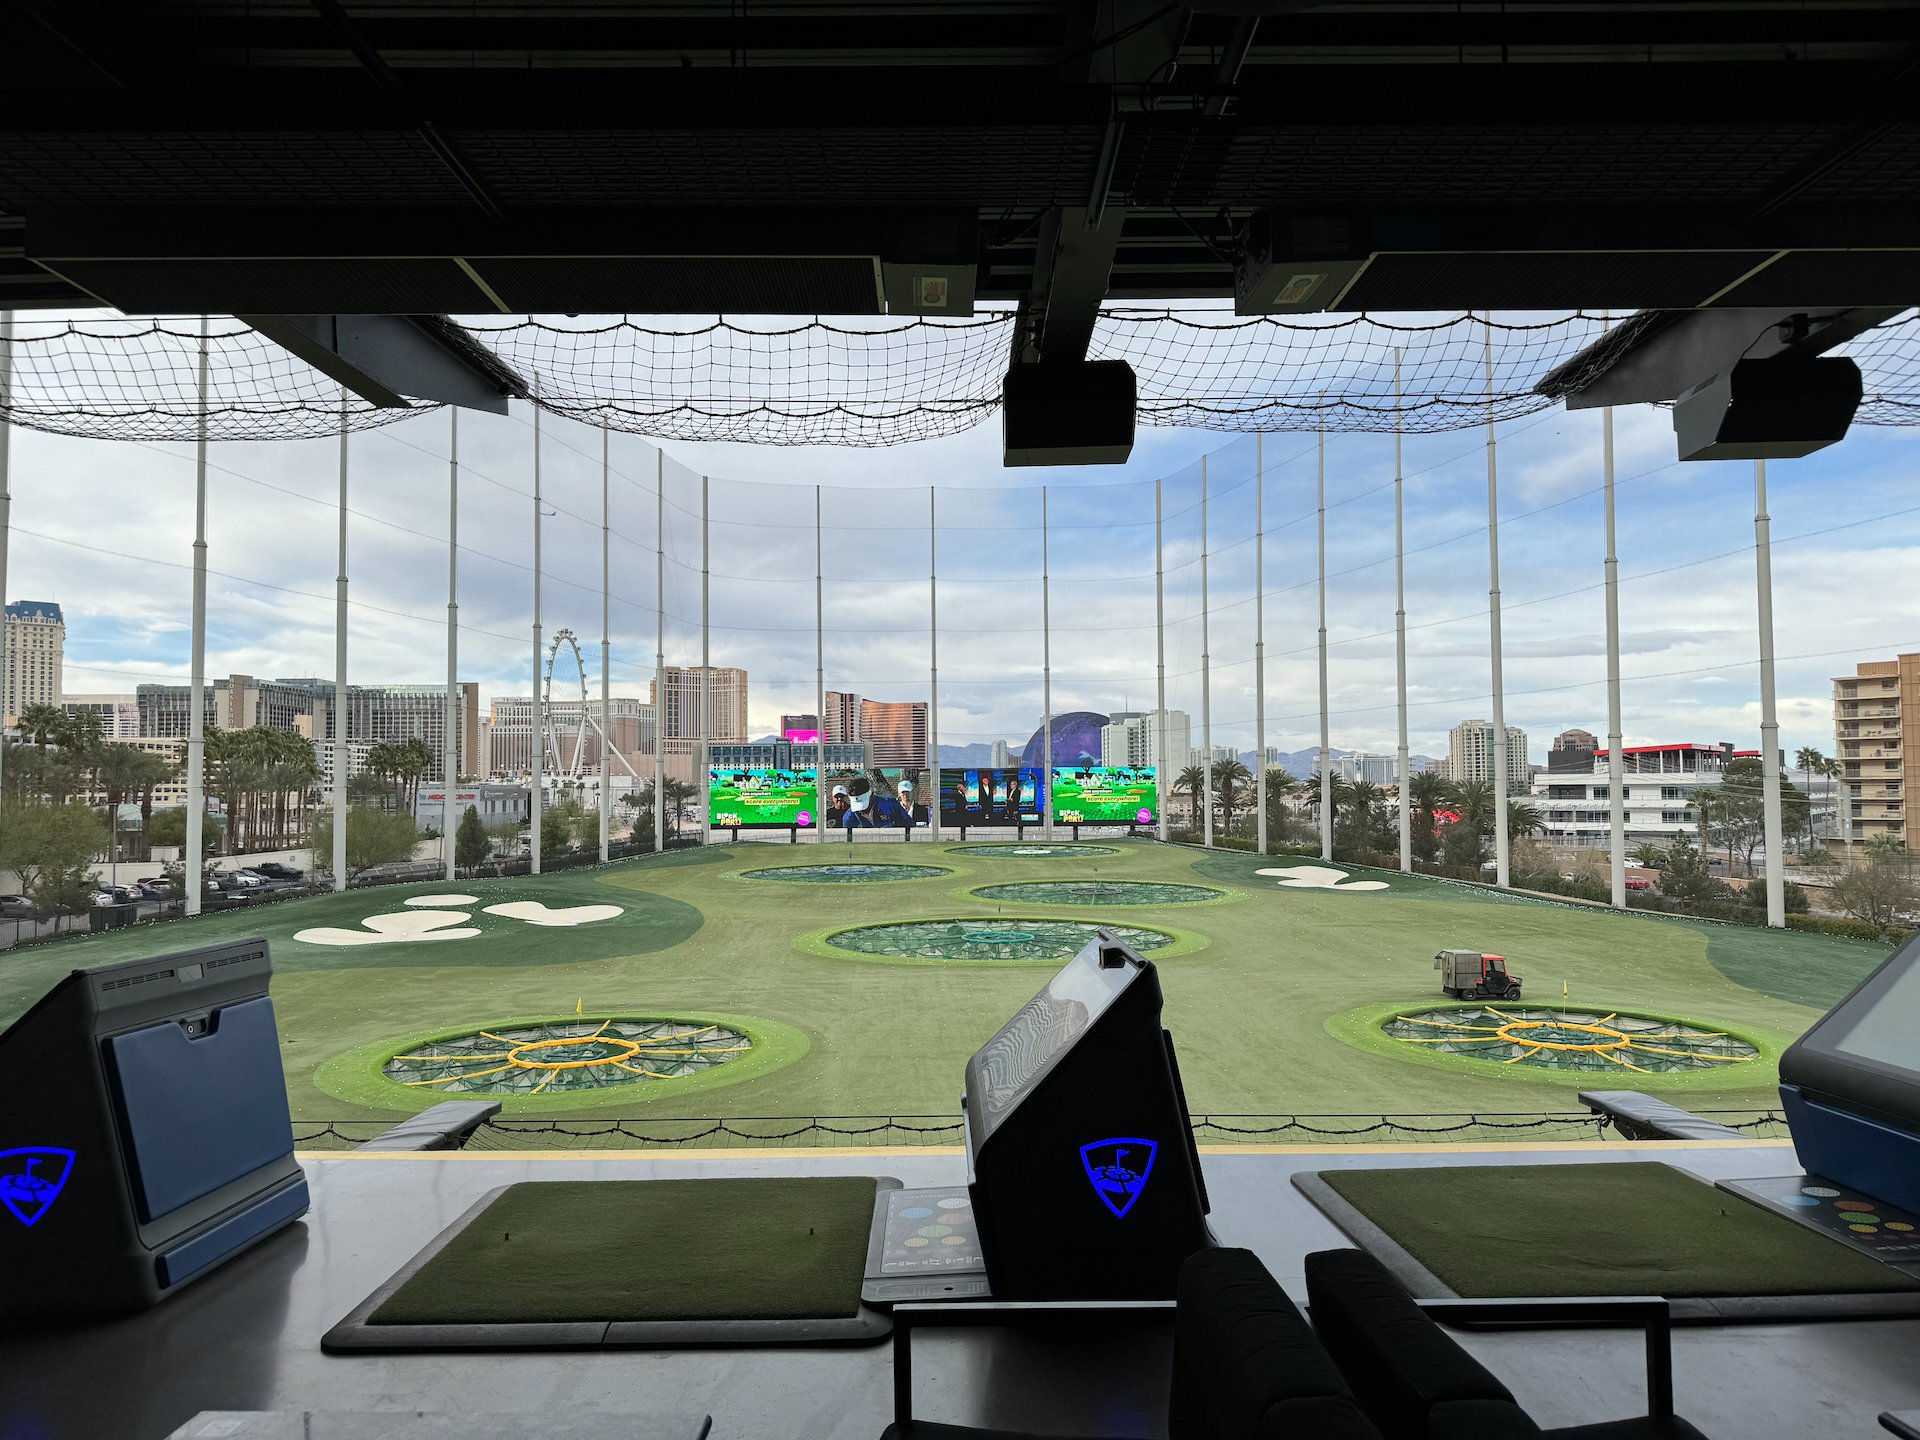  The view from our pod - you can see all the targets out on the driving range. 